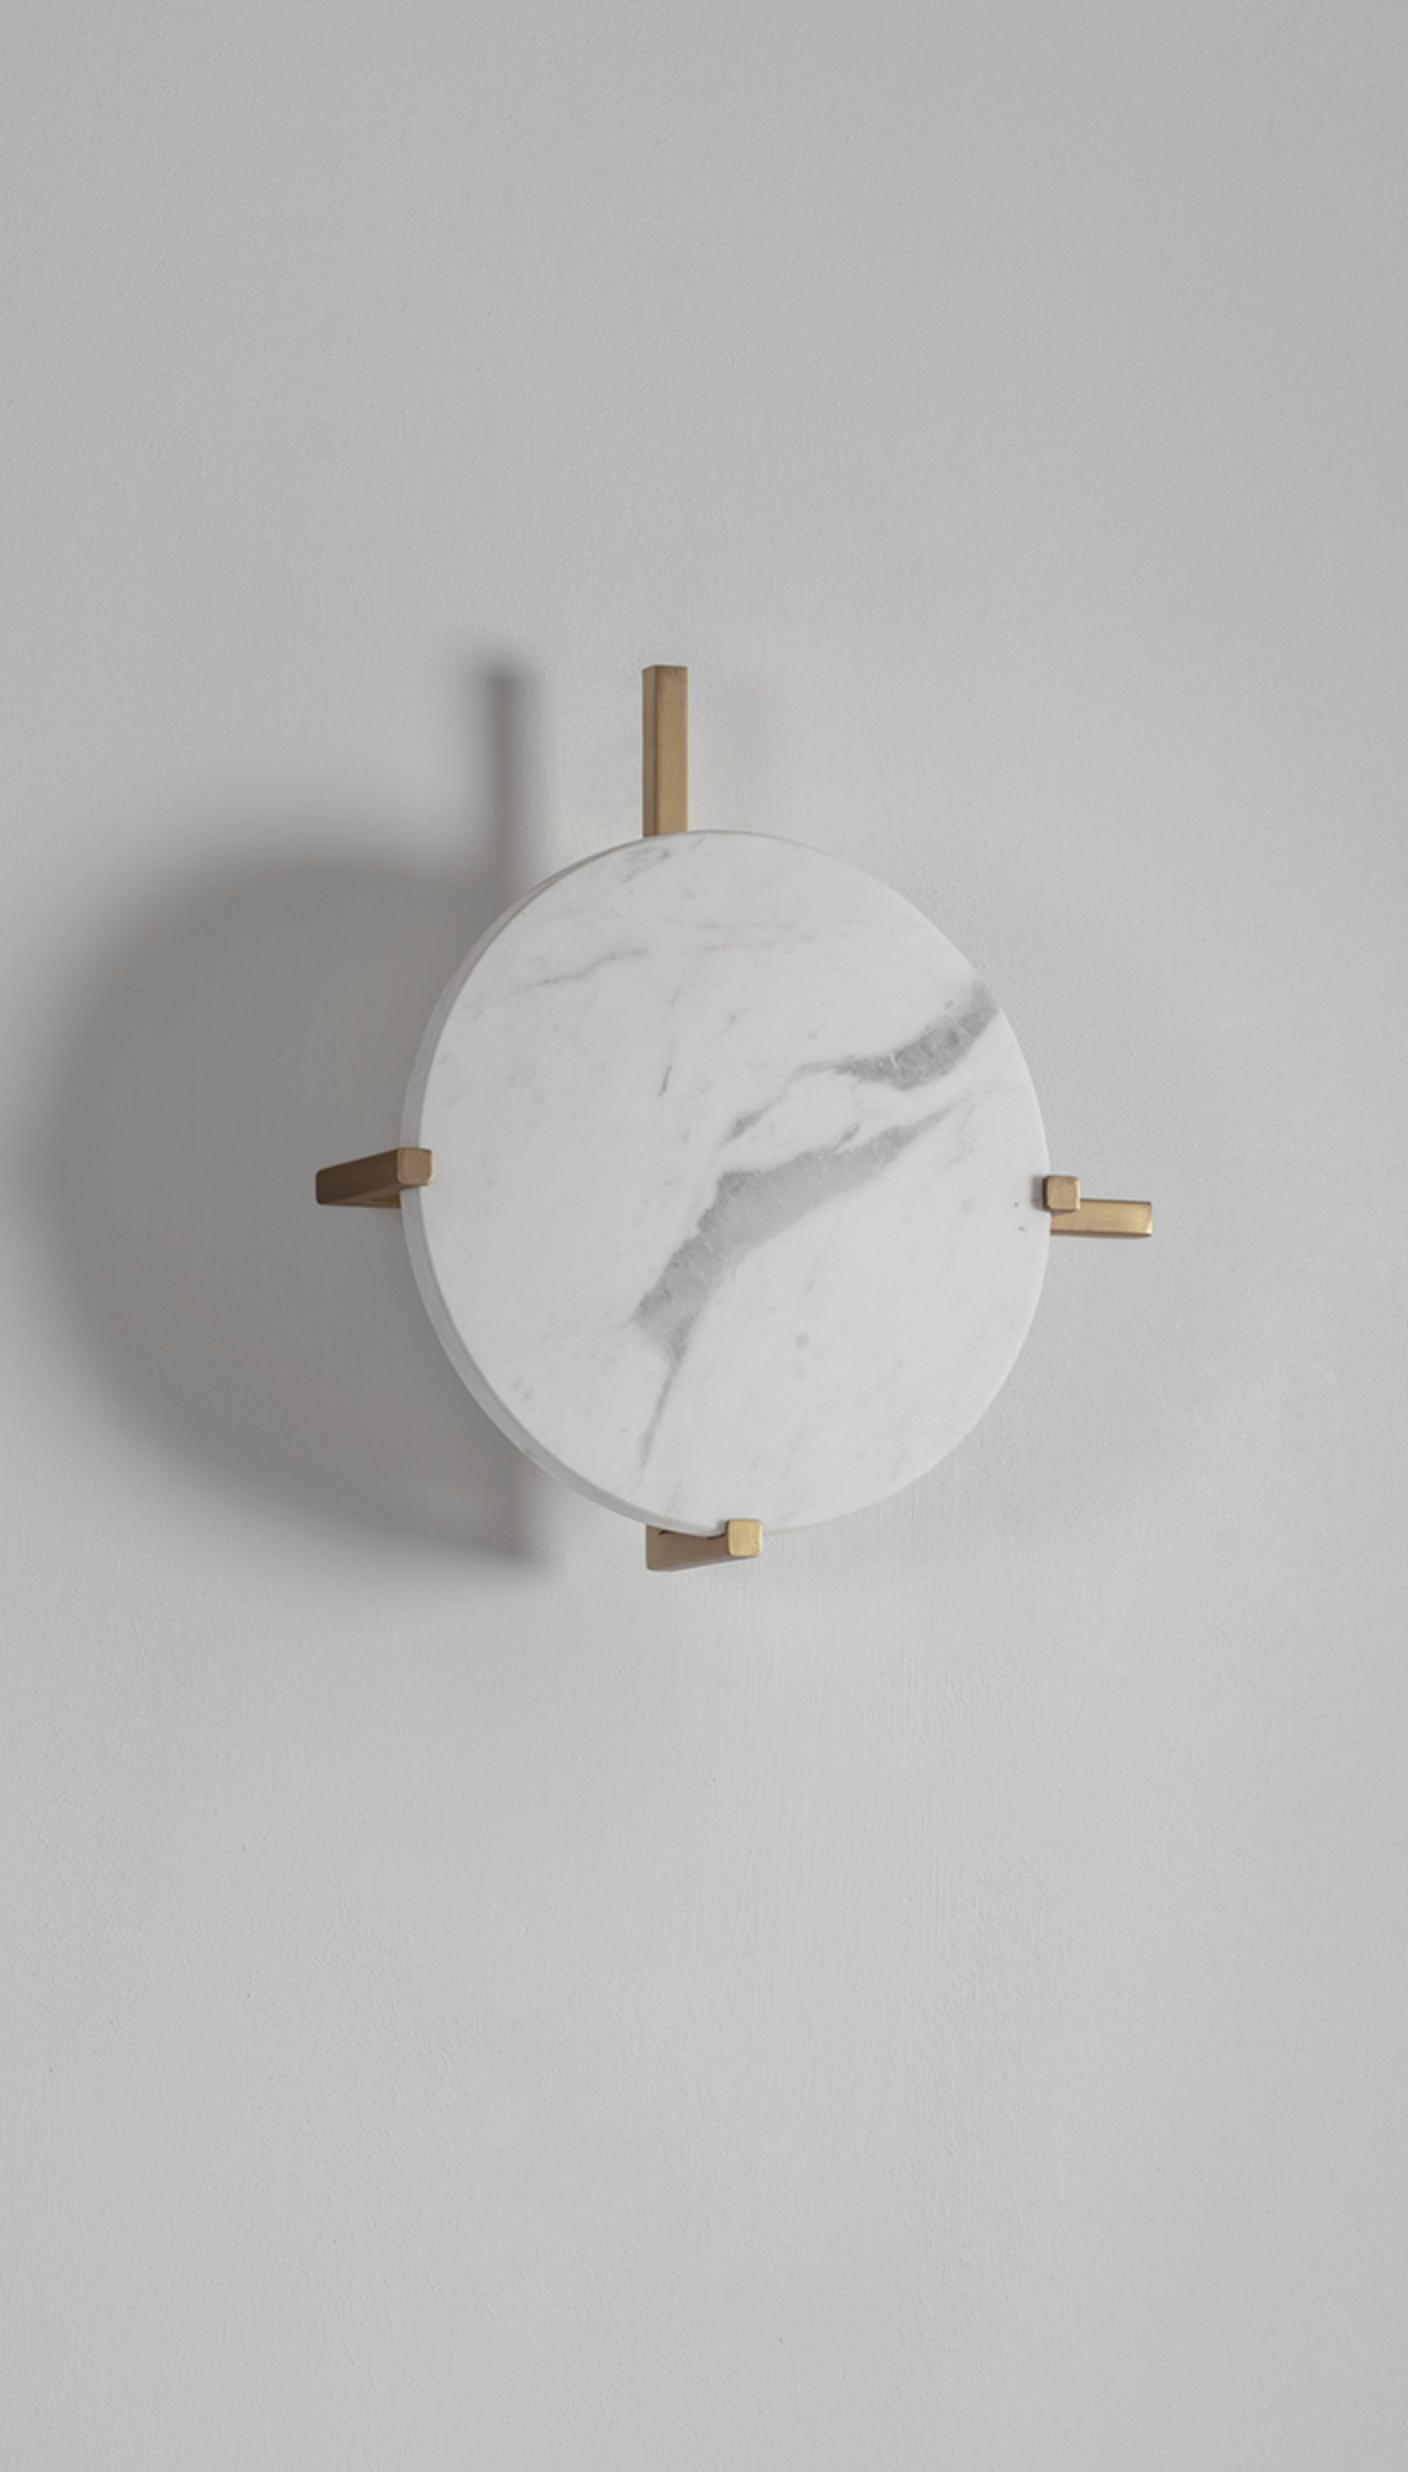 Marble Disc Wall Light by Square in Circle
Dimensions: W 30 x H 30 x D 4 cm
Materials: Brushed brass finish, white marble

This disc-shaped wall light comes with a metal bracket attached behind. The two arms of the bracket project beyond the disc